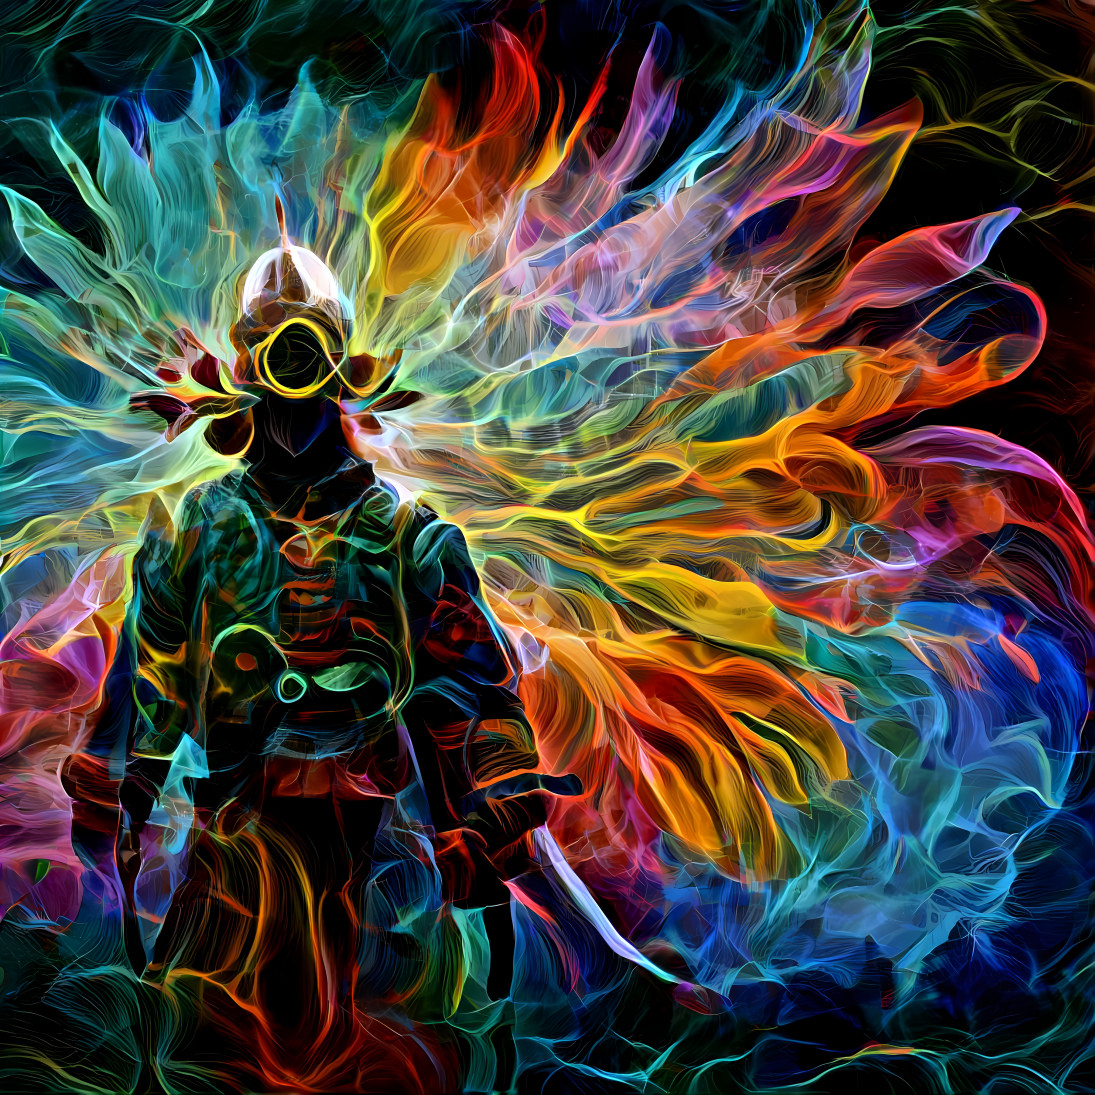 Psychedelic Warrior by Porter